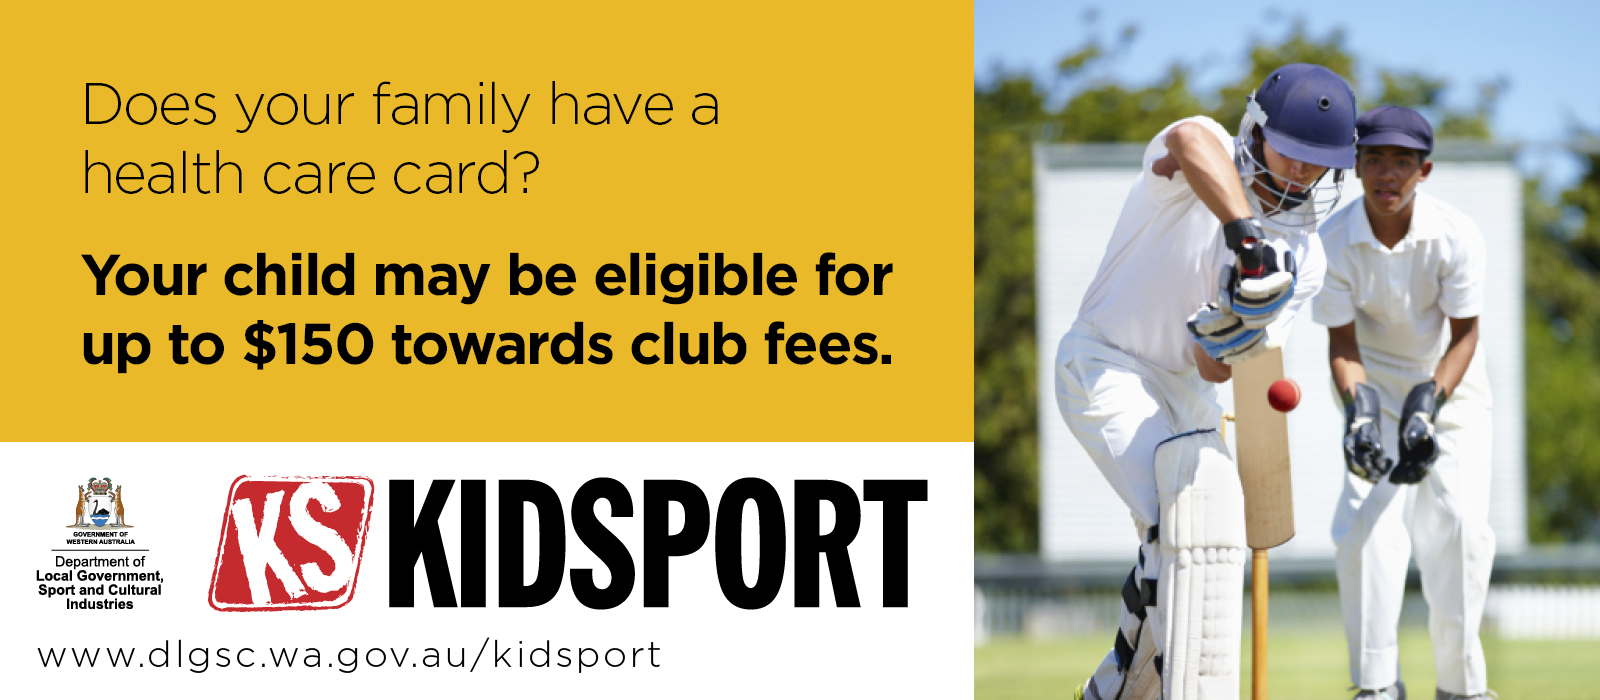 KidSport image Does your family have a health care card banner